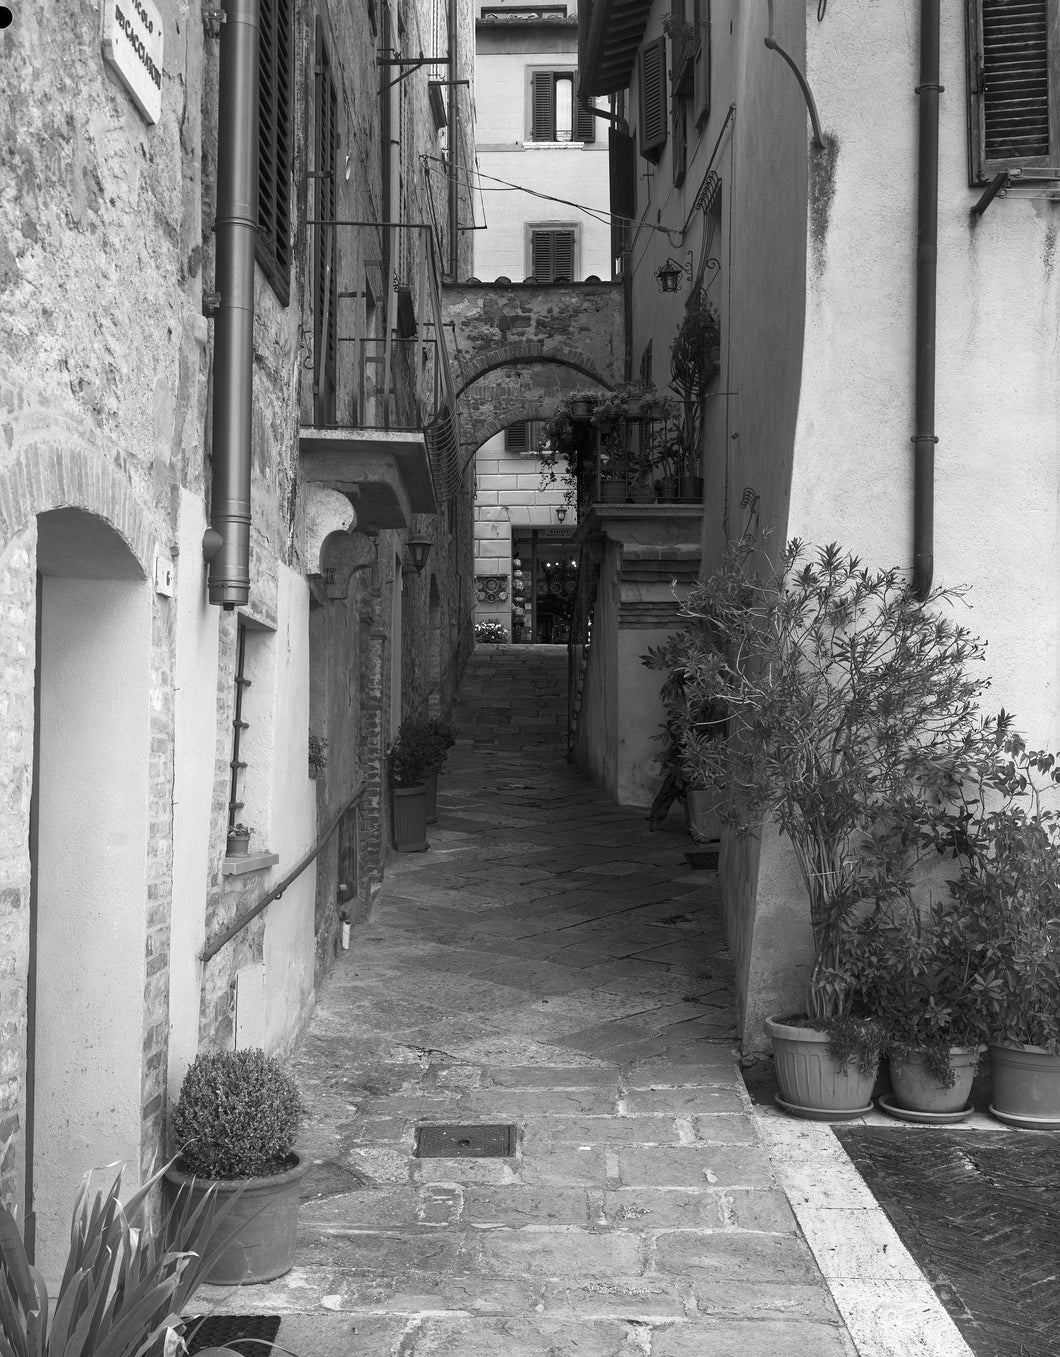 Exploring a Back Alley in Montepulciano - 11”x14” Hahnemühle Photo Rag Print